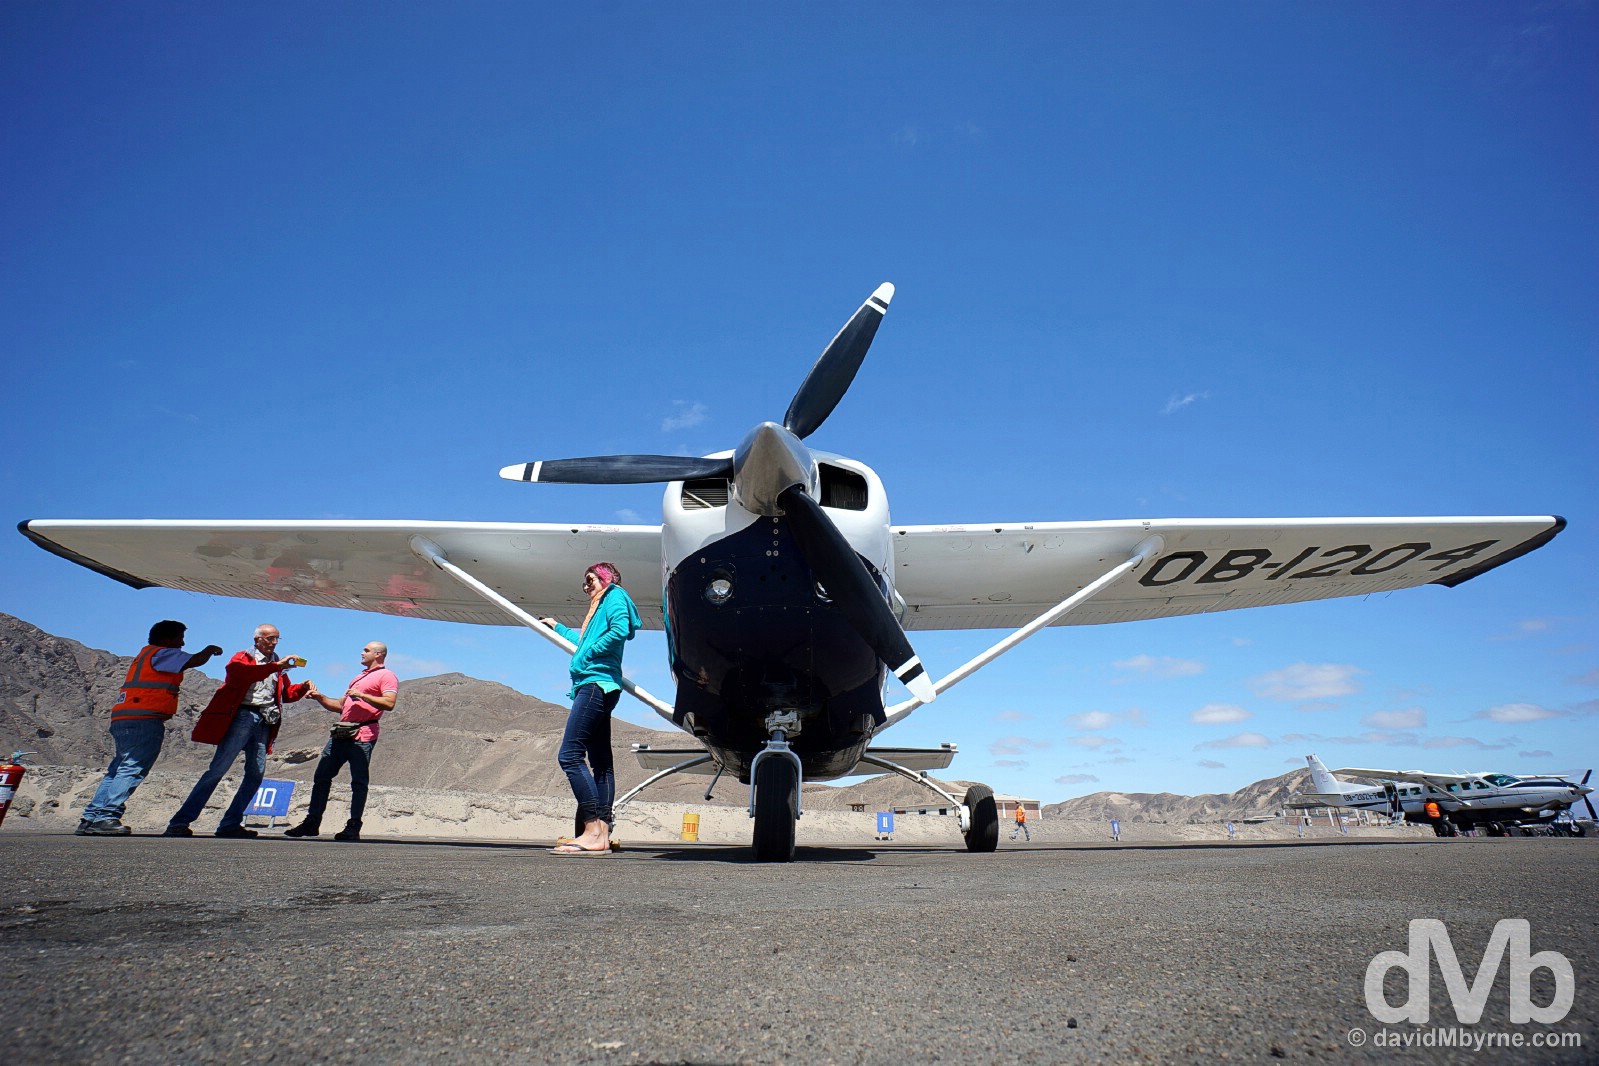 Cessna C206 on the tarmac of Nasca Airport prior to departure for a flight over the Nasca Plain to view the Nasca Lines. Nasca, southern Peru. August 11, 2015.